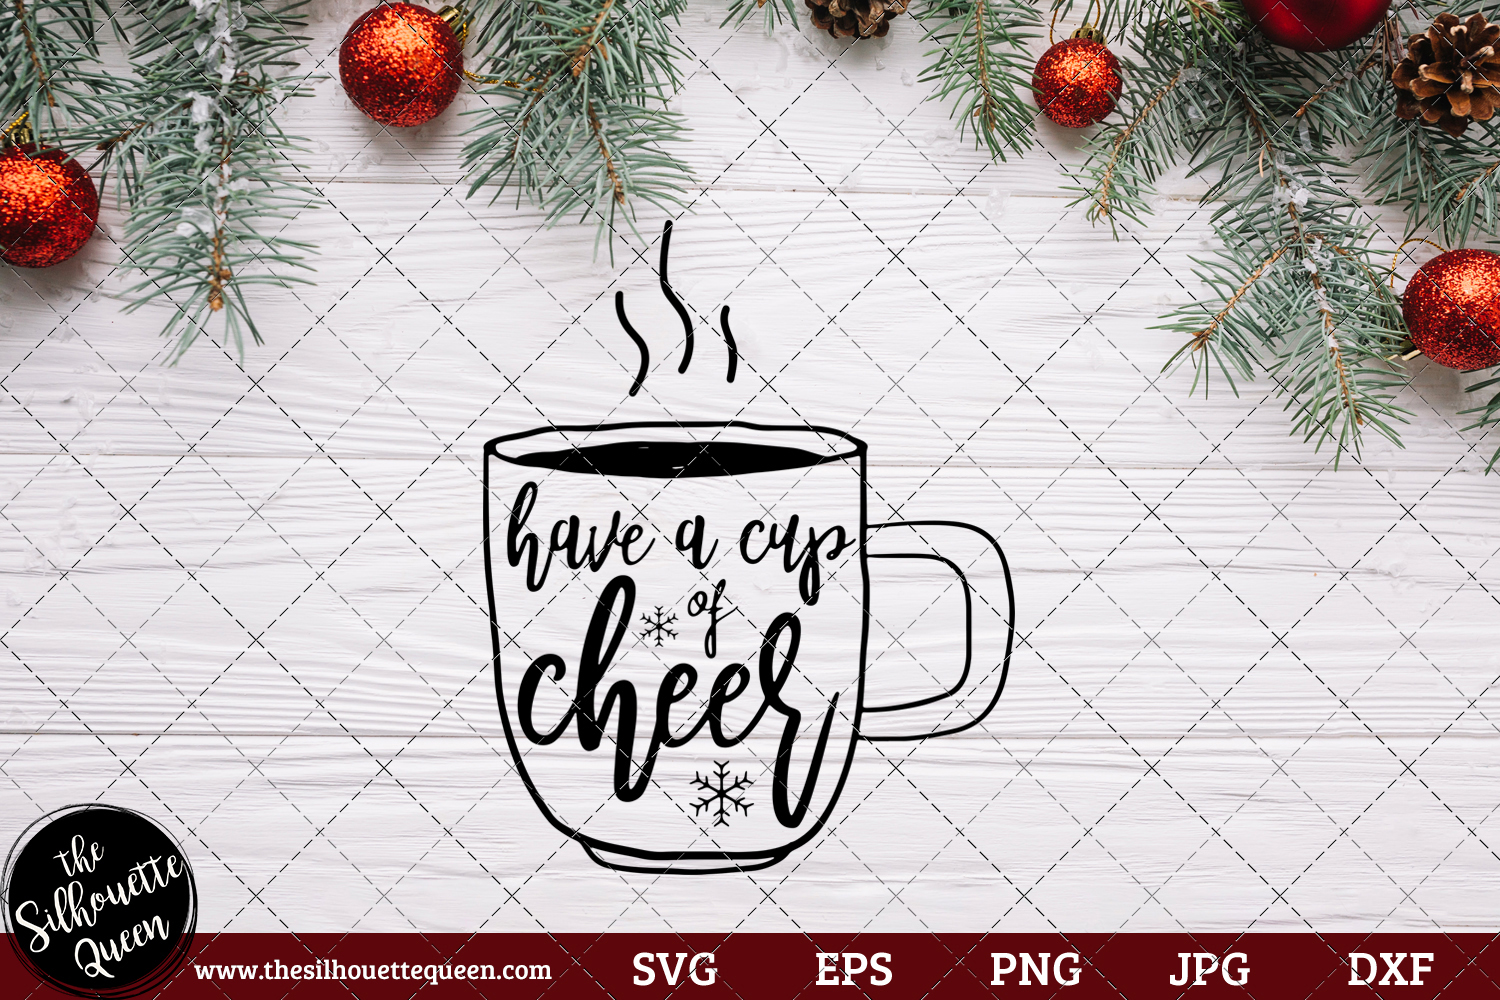 Cup of cheer svg